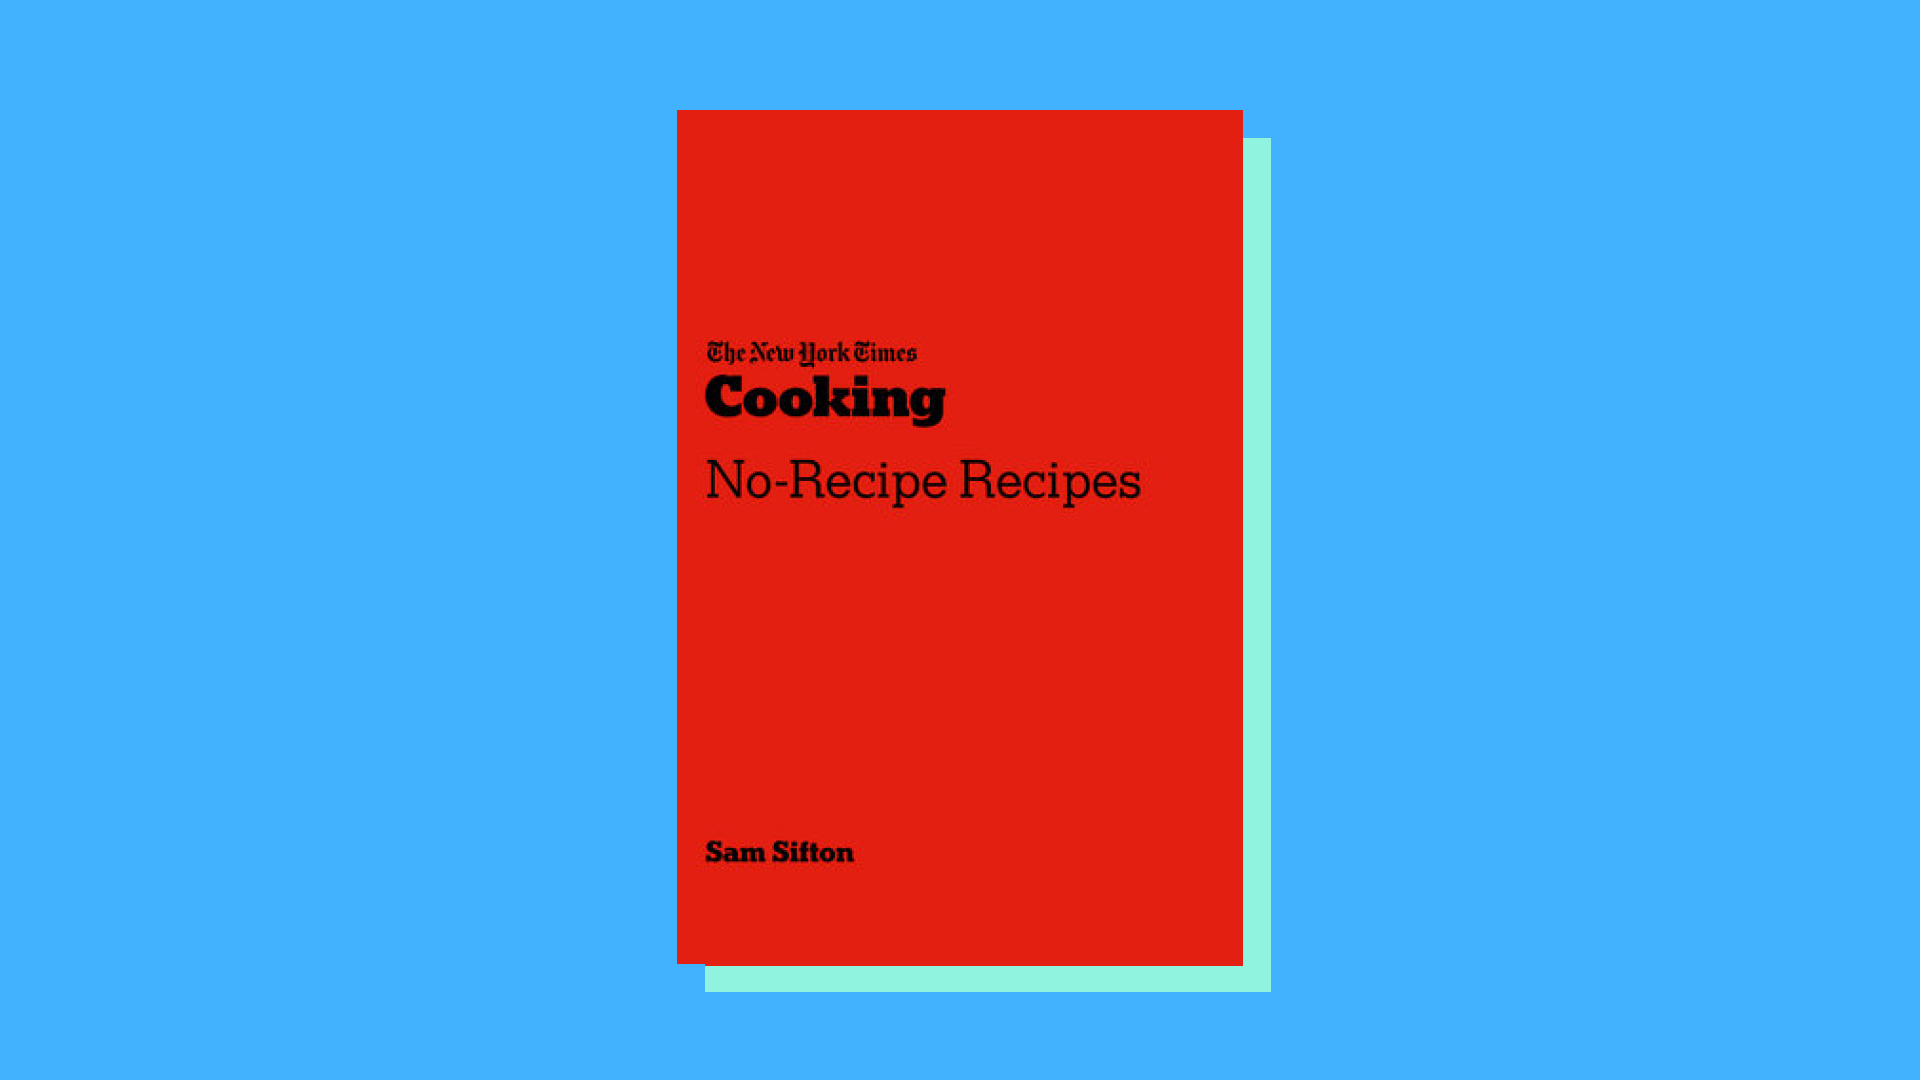 “The New York Times Cooking No-Recipe Recipes” by Sam Sifton